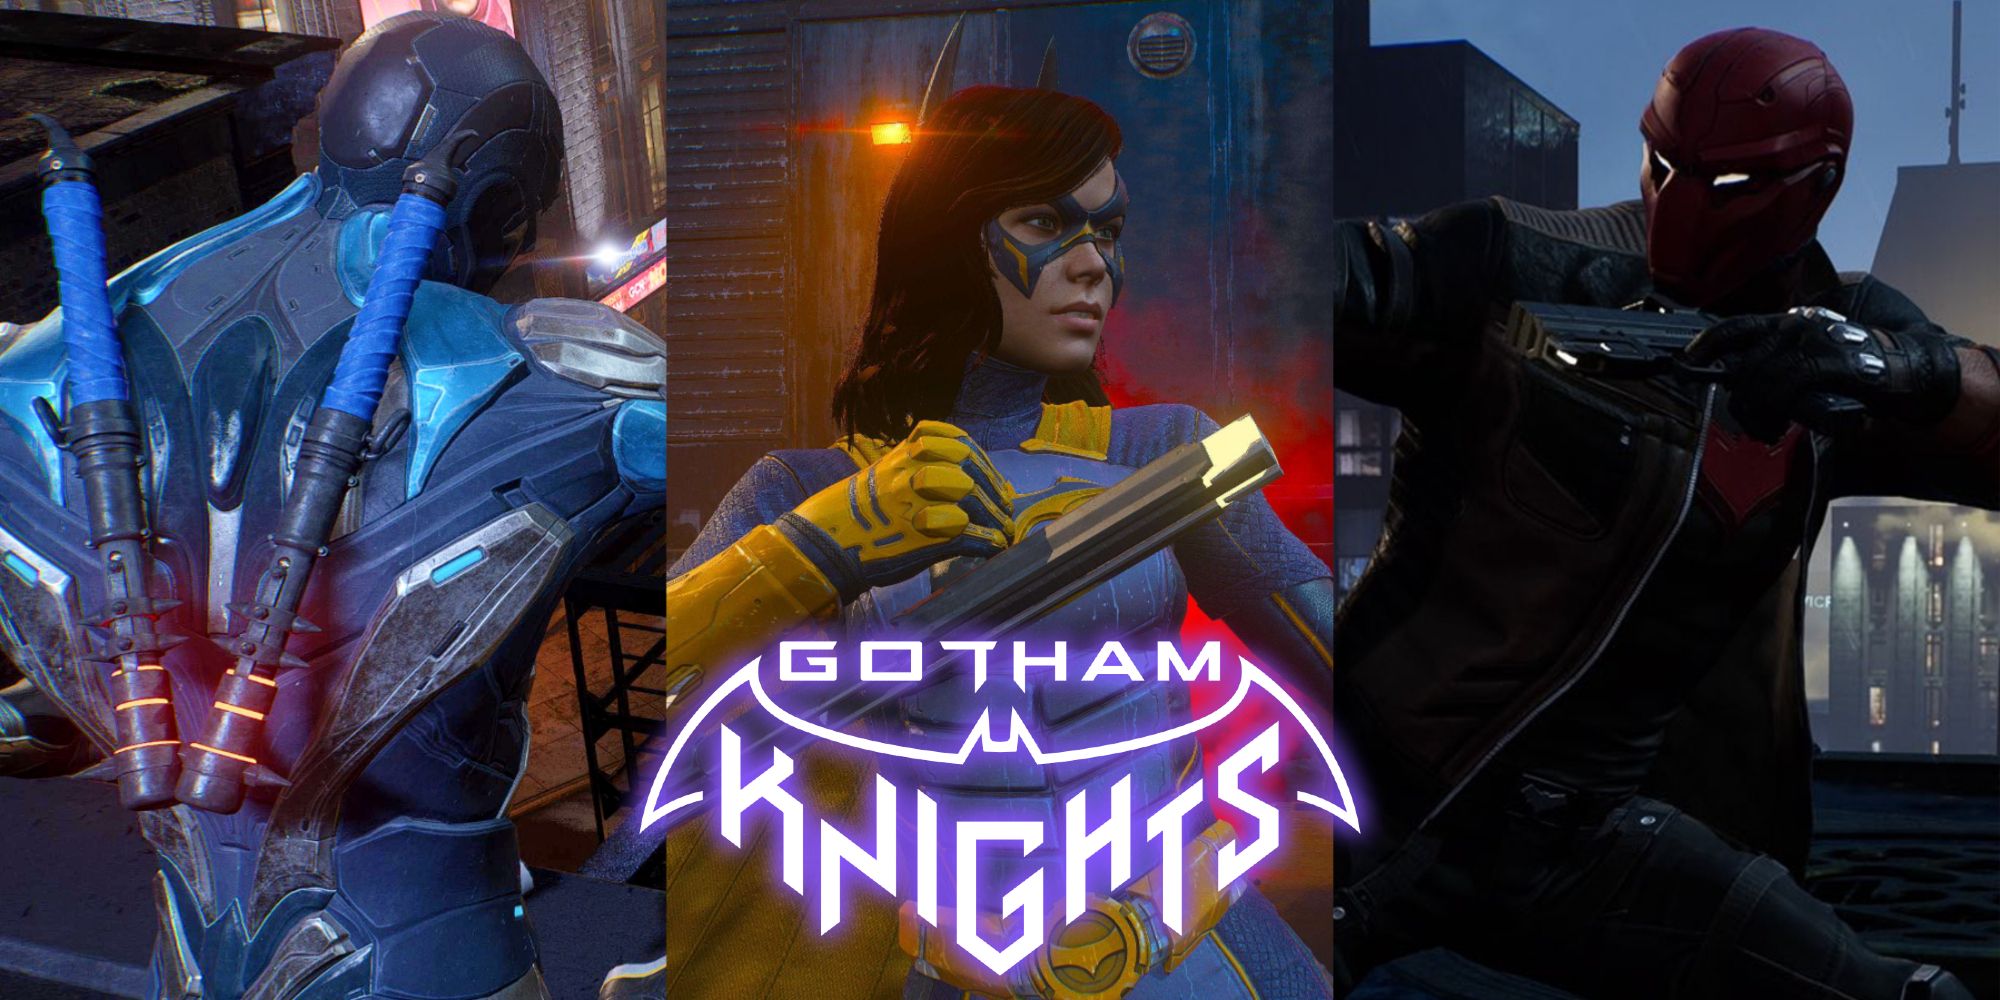 Gotham Knights: Every Weapon In The Game, Ranked From Worst To Best